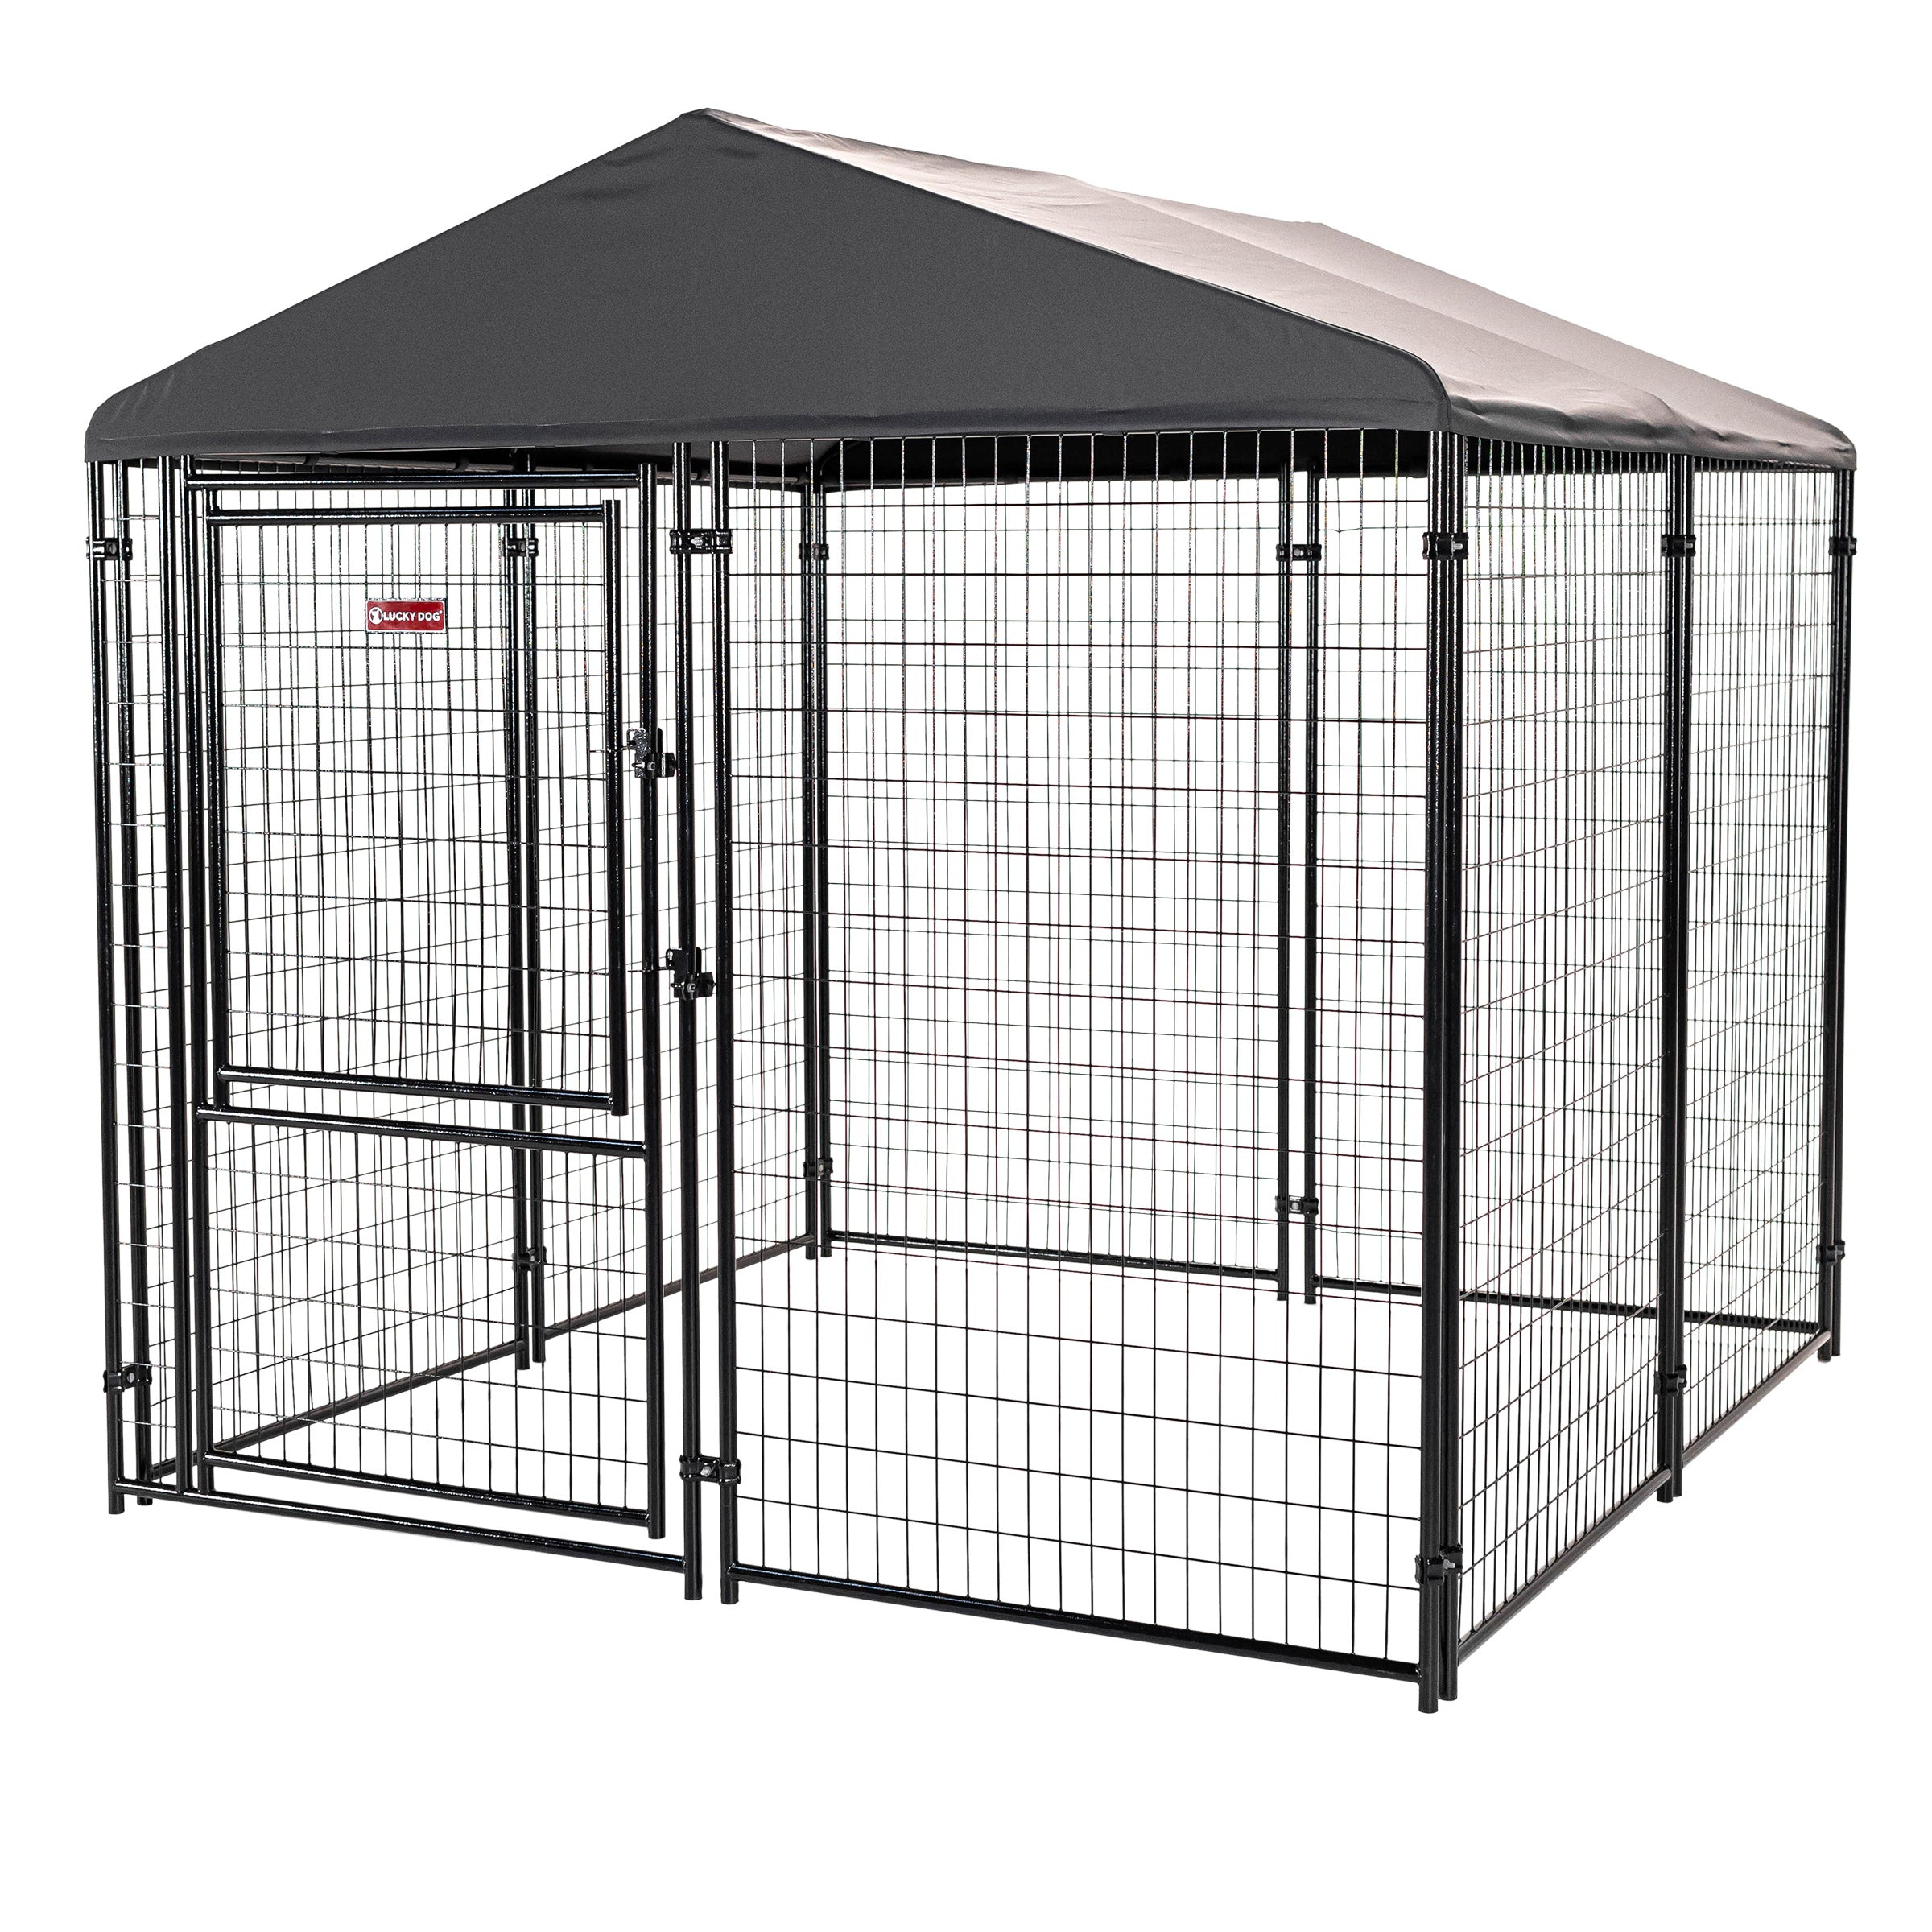 Lucky Dog STAY Series Executive Dog Kennel 8'x8' with Privacy Screen Image